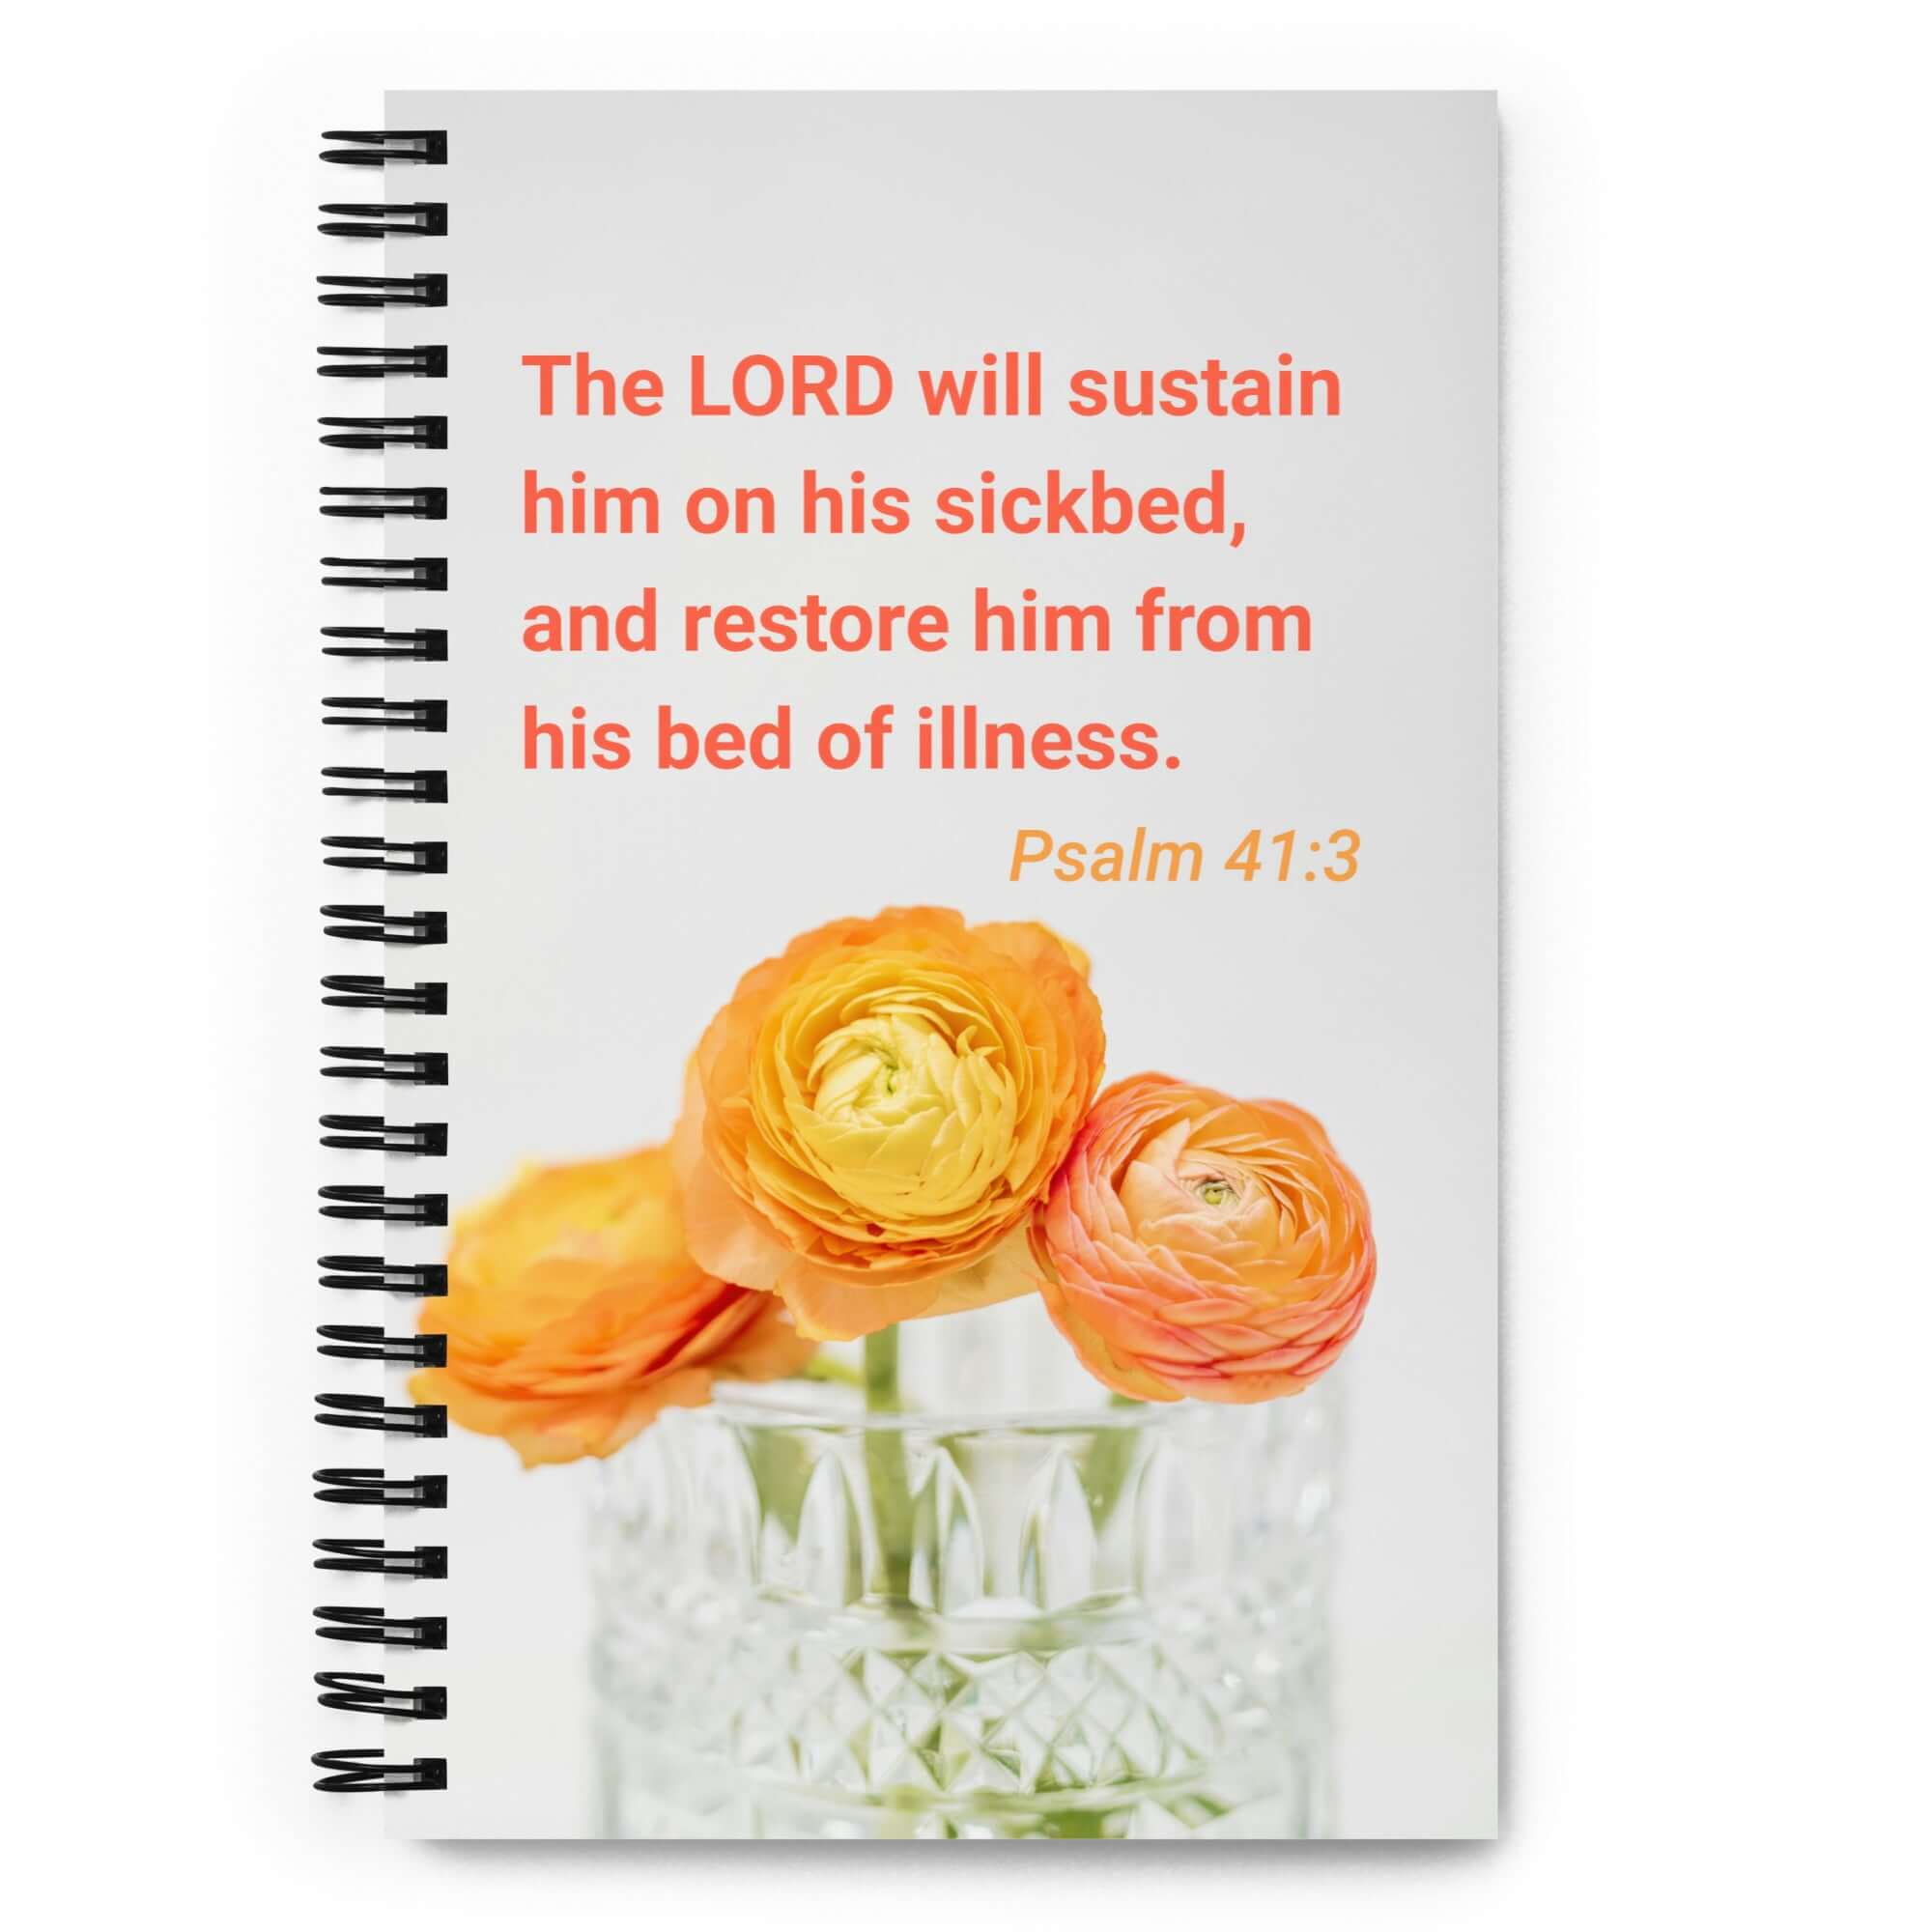 Psalm 41:3 - Bible Verse, LORD will sustain Spiral Notebook